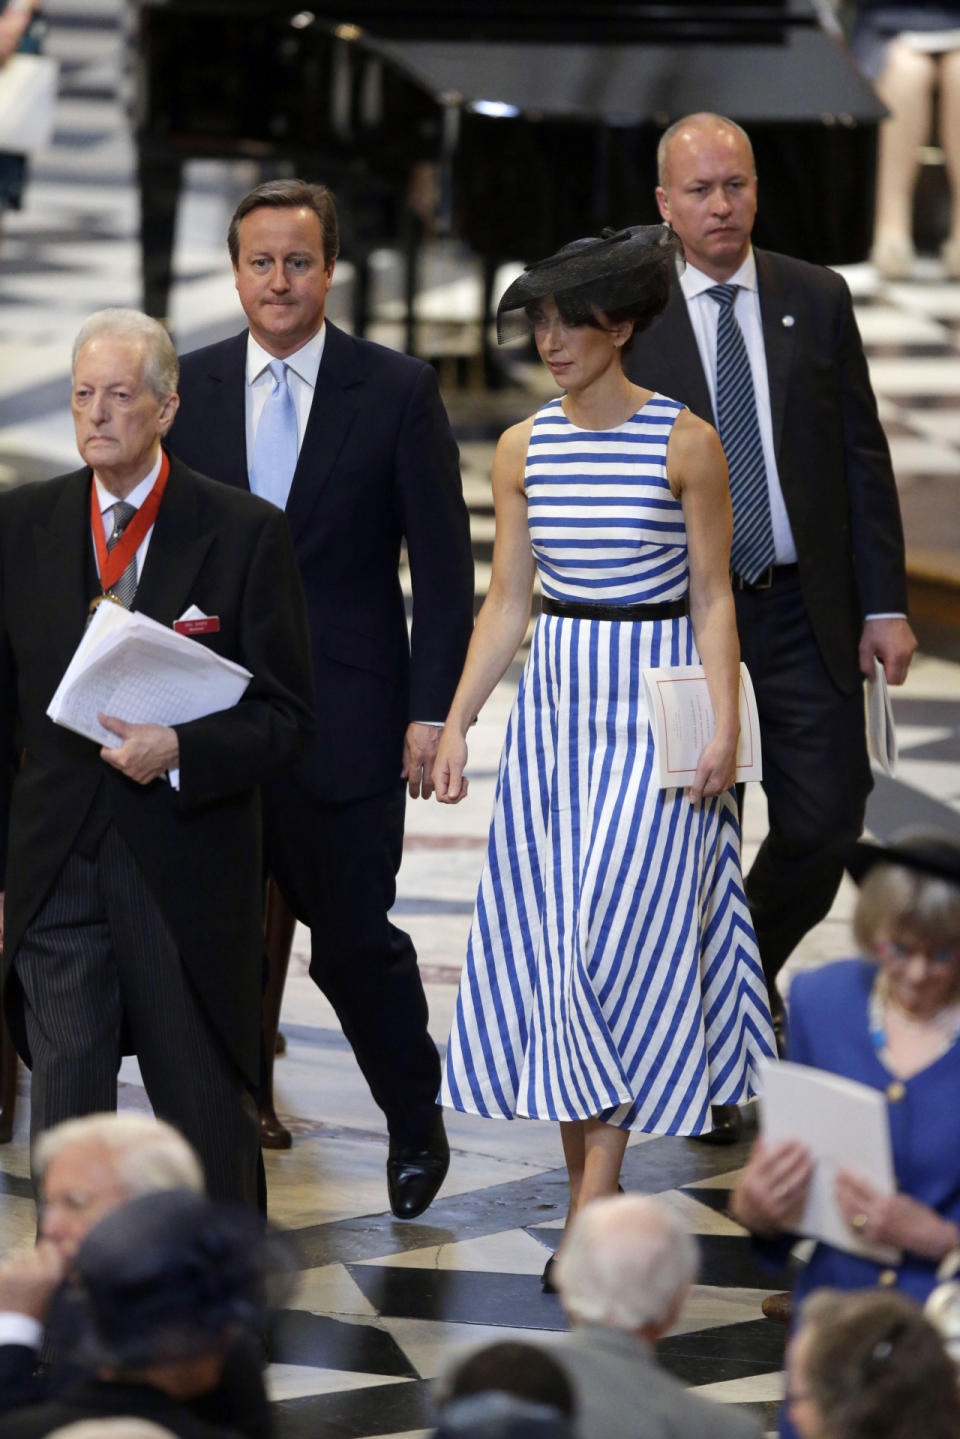 Samantha Cameron in a blue and white striped dress with her husband Prime Minister David Cameron